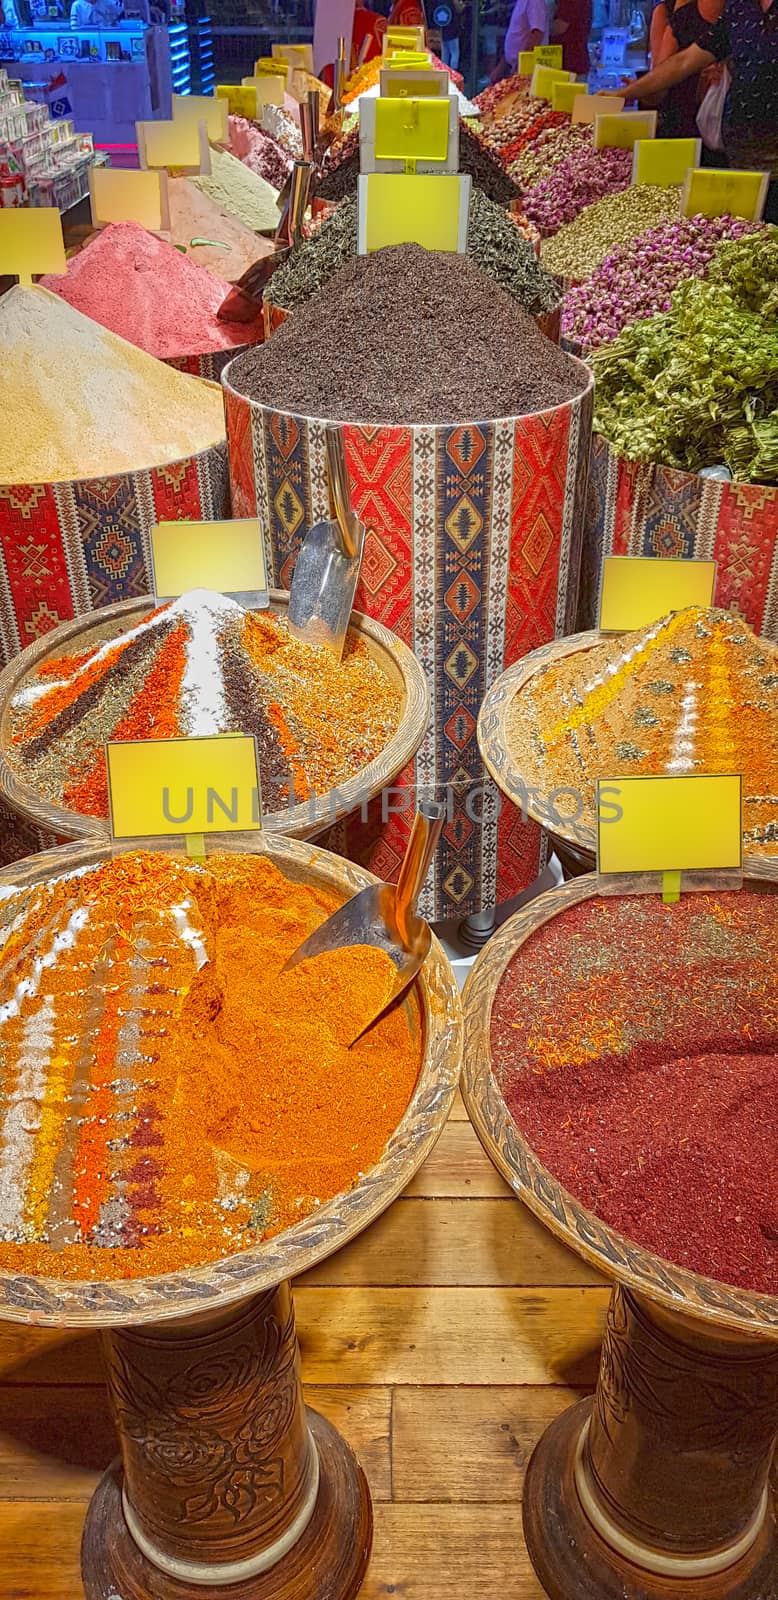 Spices for sale in bazaar by savcoco